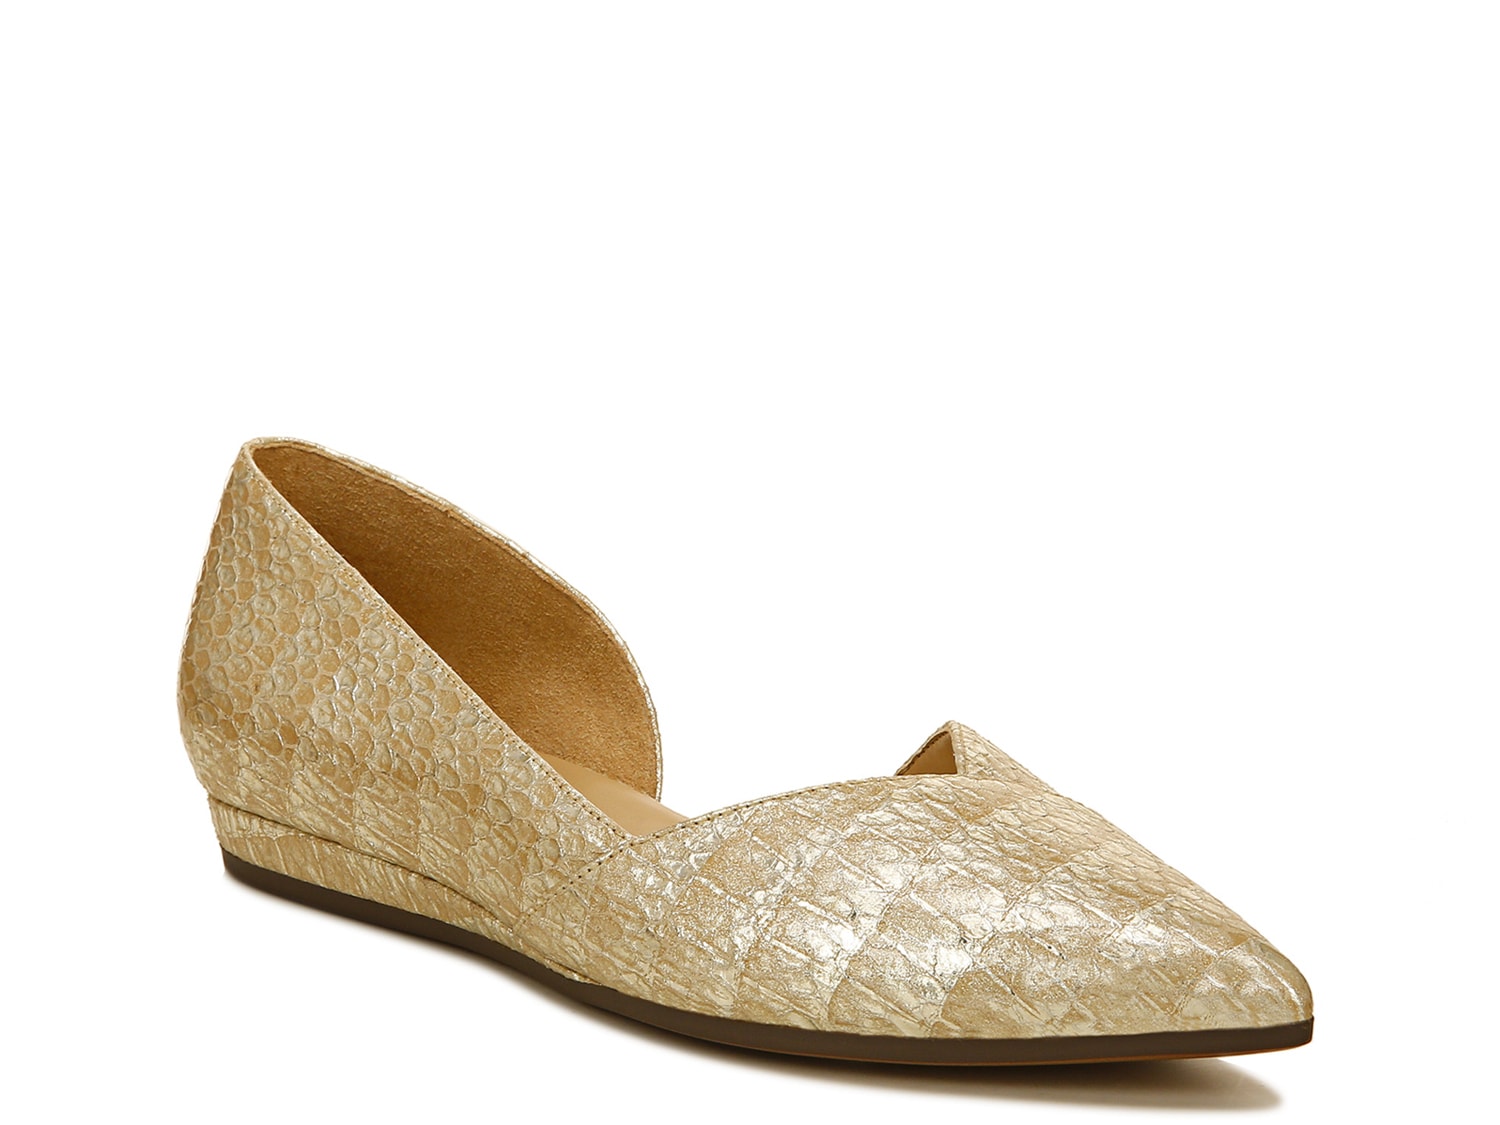 Naturalizer Kristin d'Orsay Flat - Free Shipping | DSW